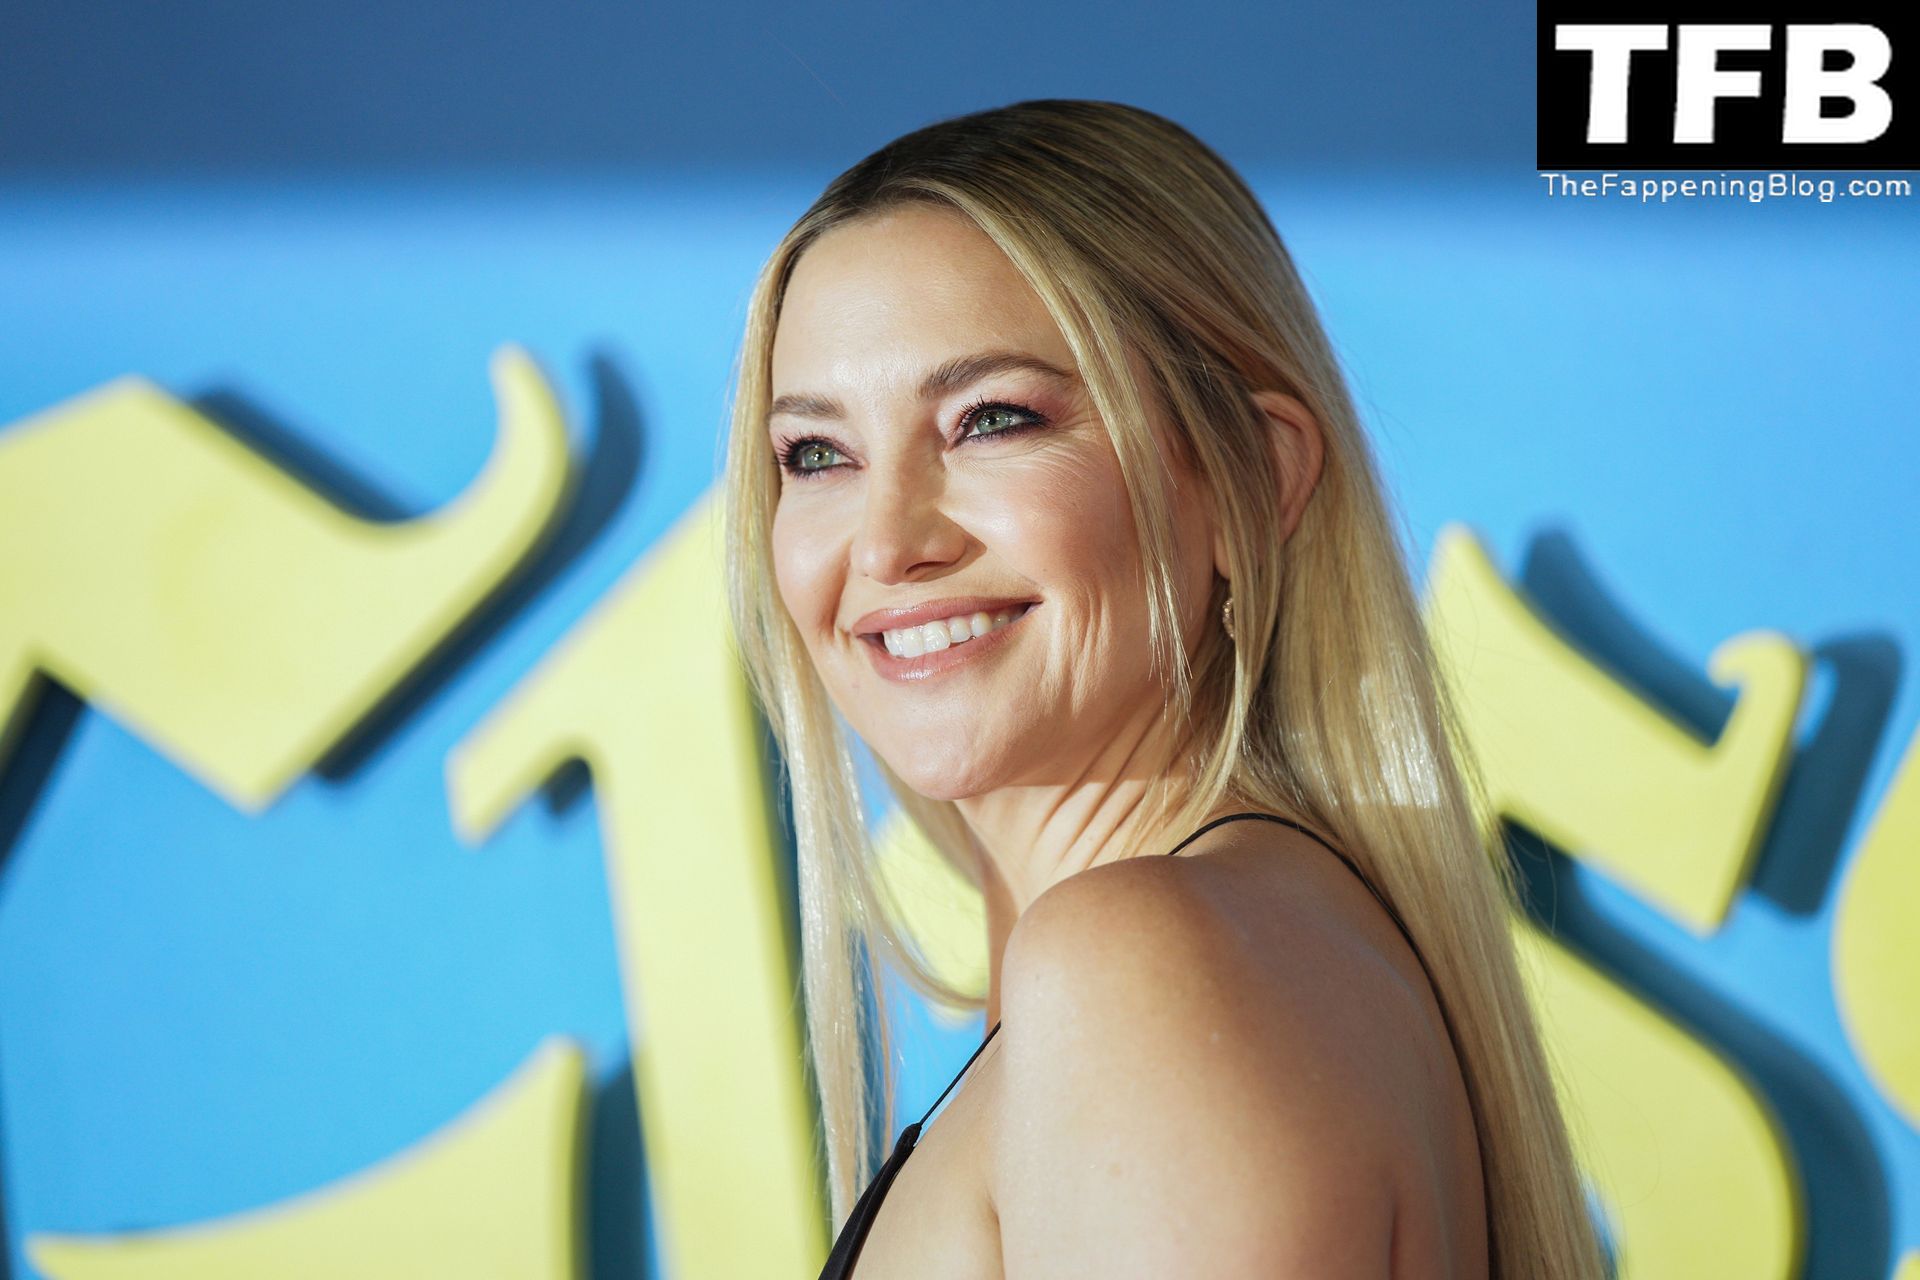 Kate-Hudson-Sexy-The-Fappening-Blog-81.jpg